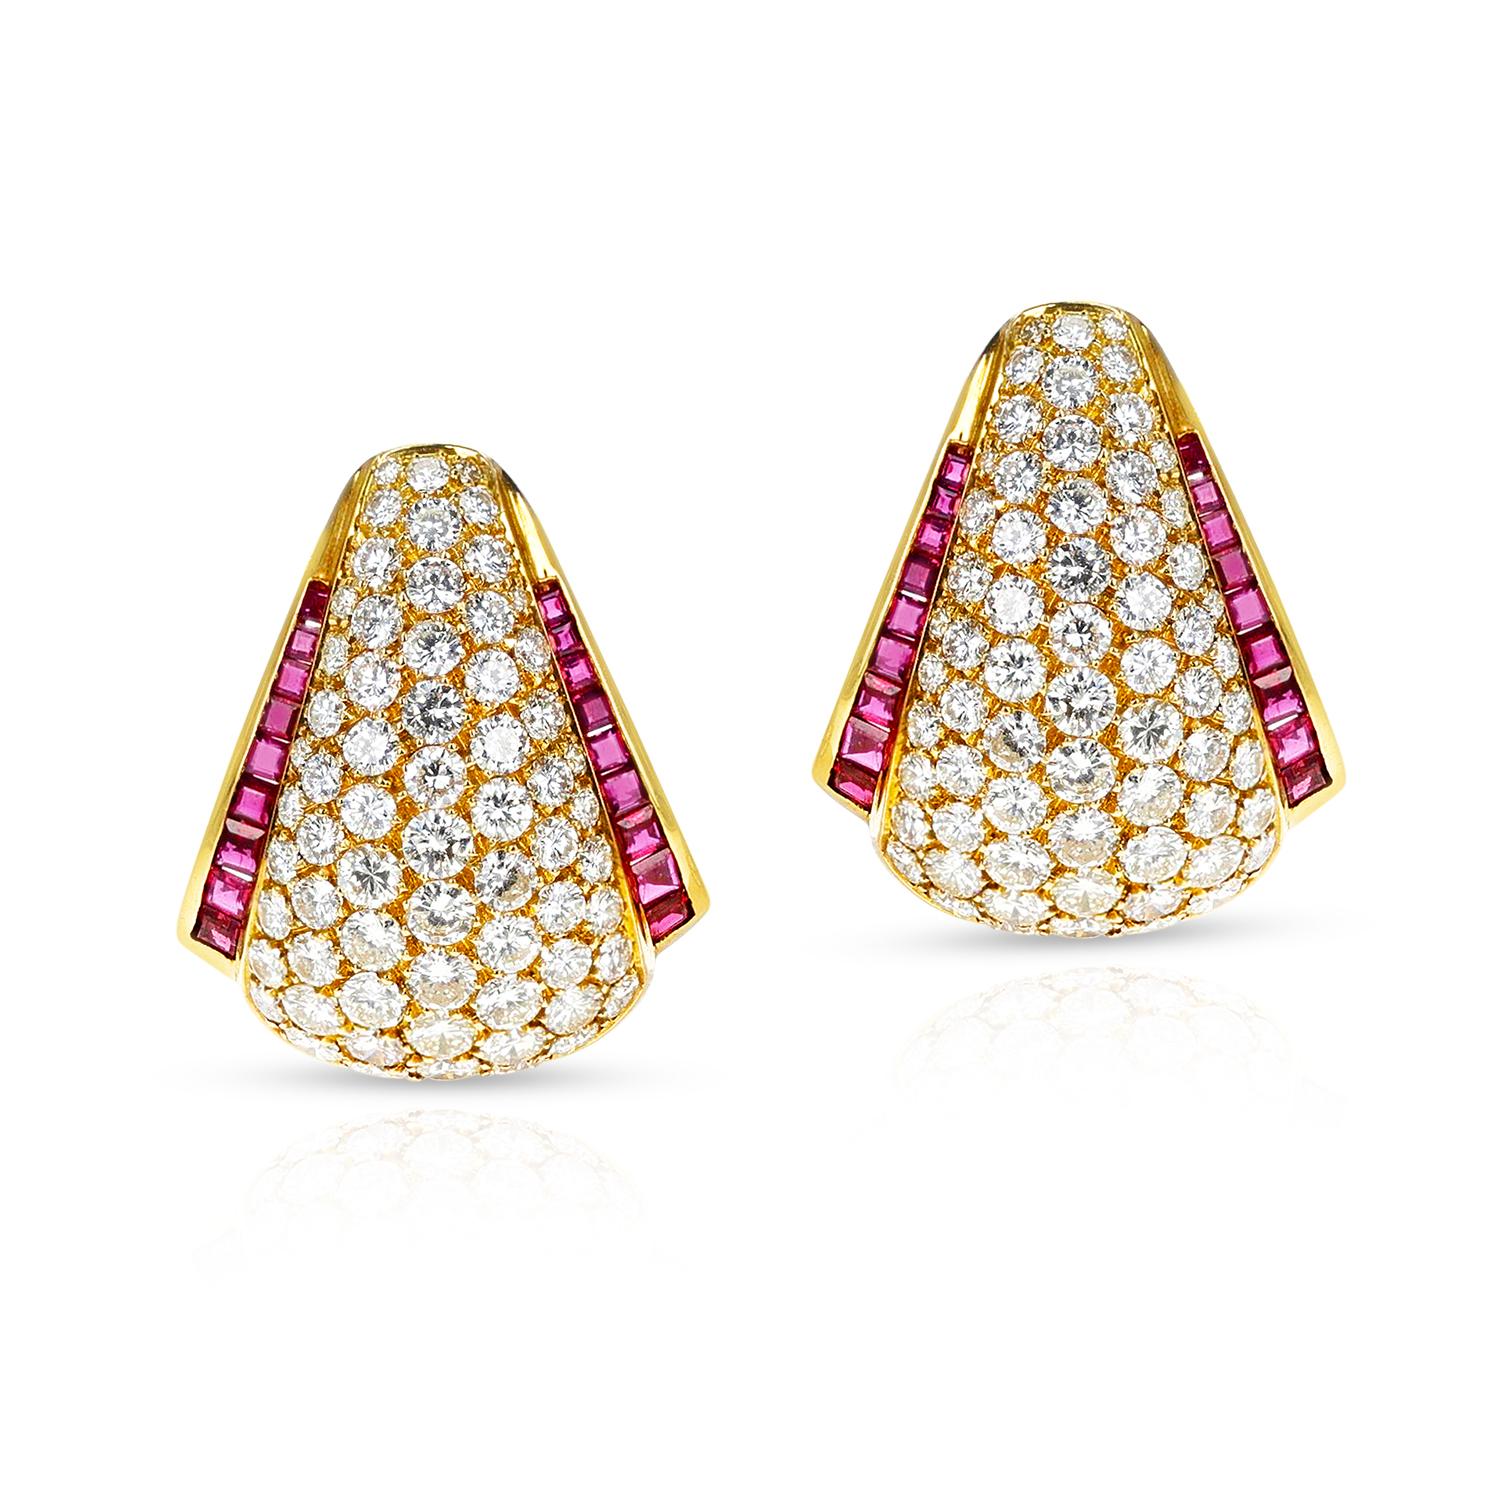 A pair of Van Cleef & Arpels Diamond and Ruby Cocktail Earrings made in 18 Karat Yellow Gold. The earrings are made in 1960s. The total weight of the earring is 31.70 grams. The diamonds weigh appx 13 carats and the rubies weigh appx 2 carats. The